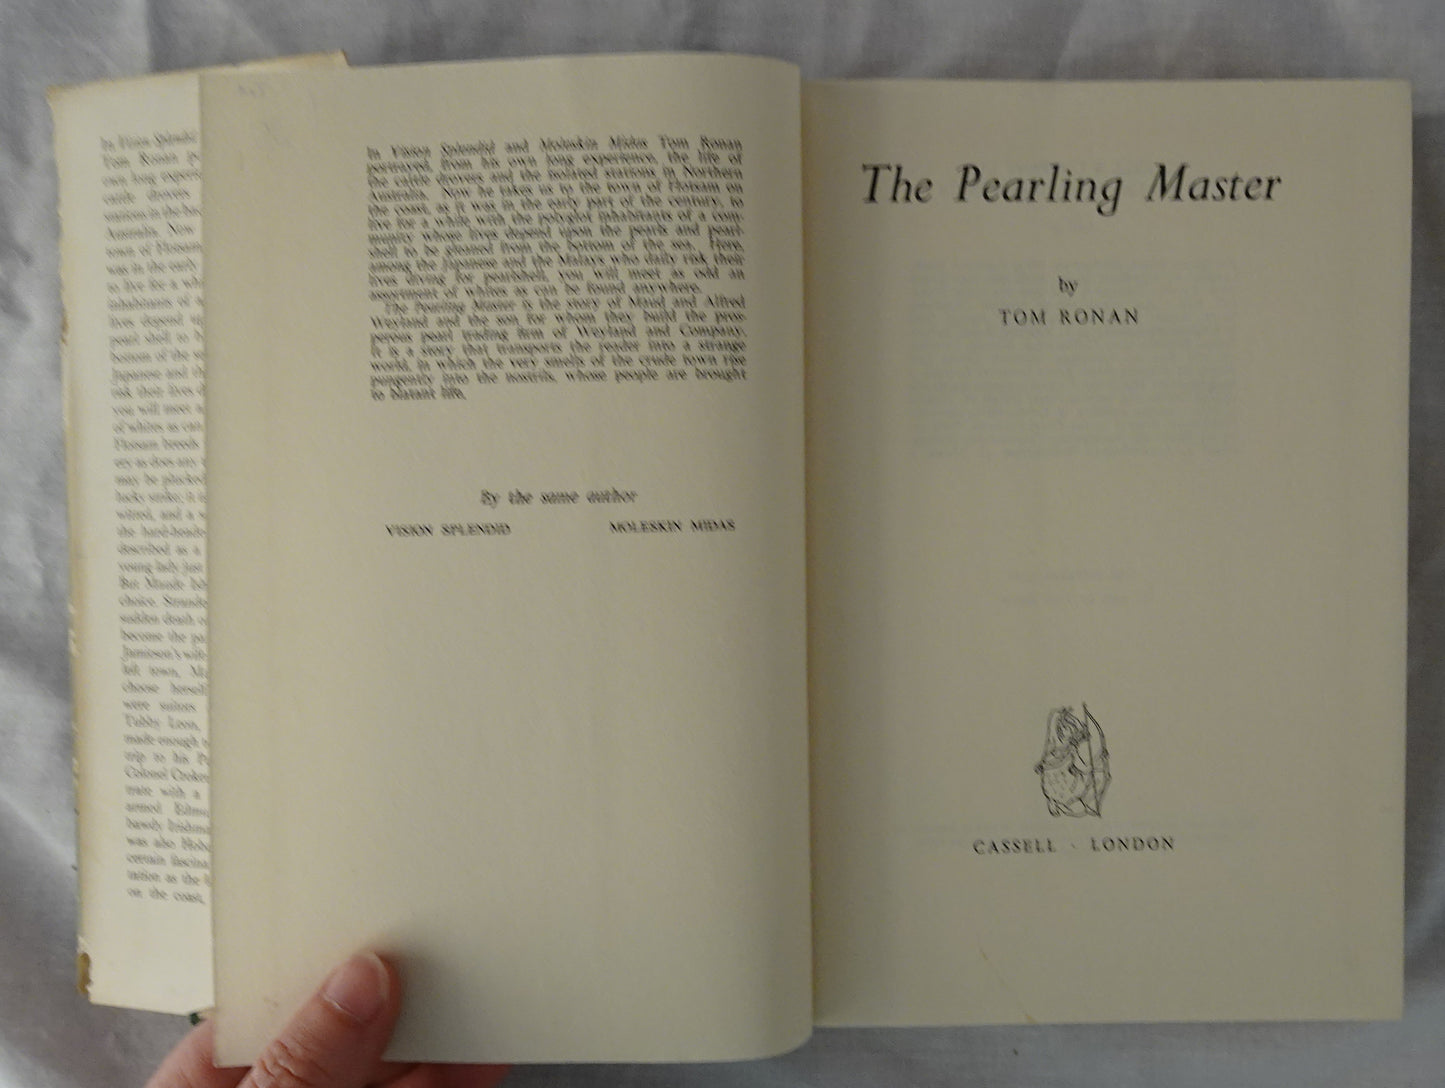 The Pearling Master by Tom Ronan